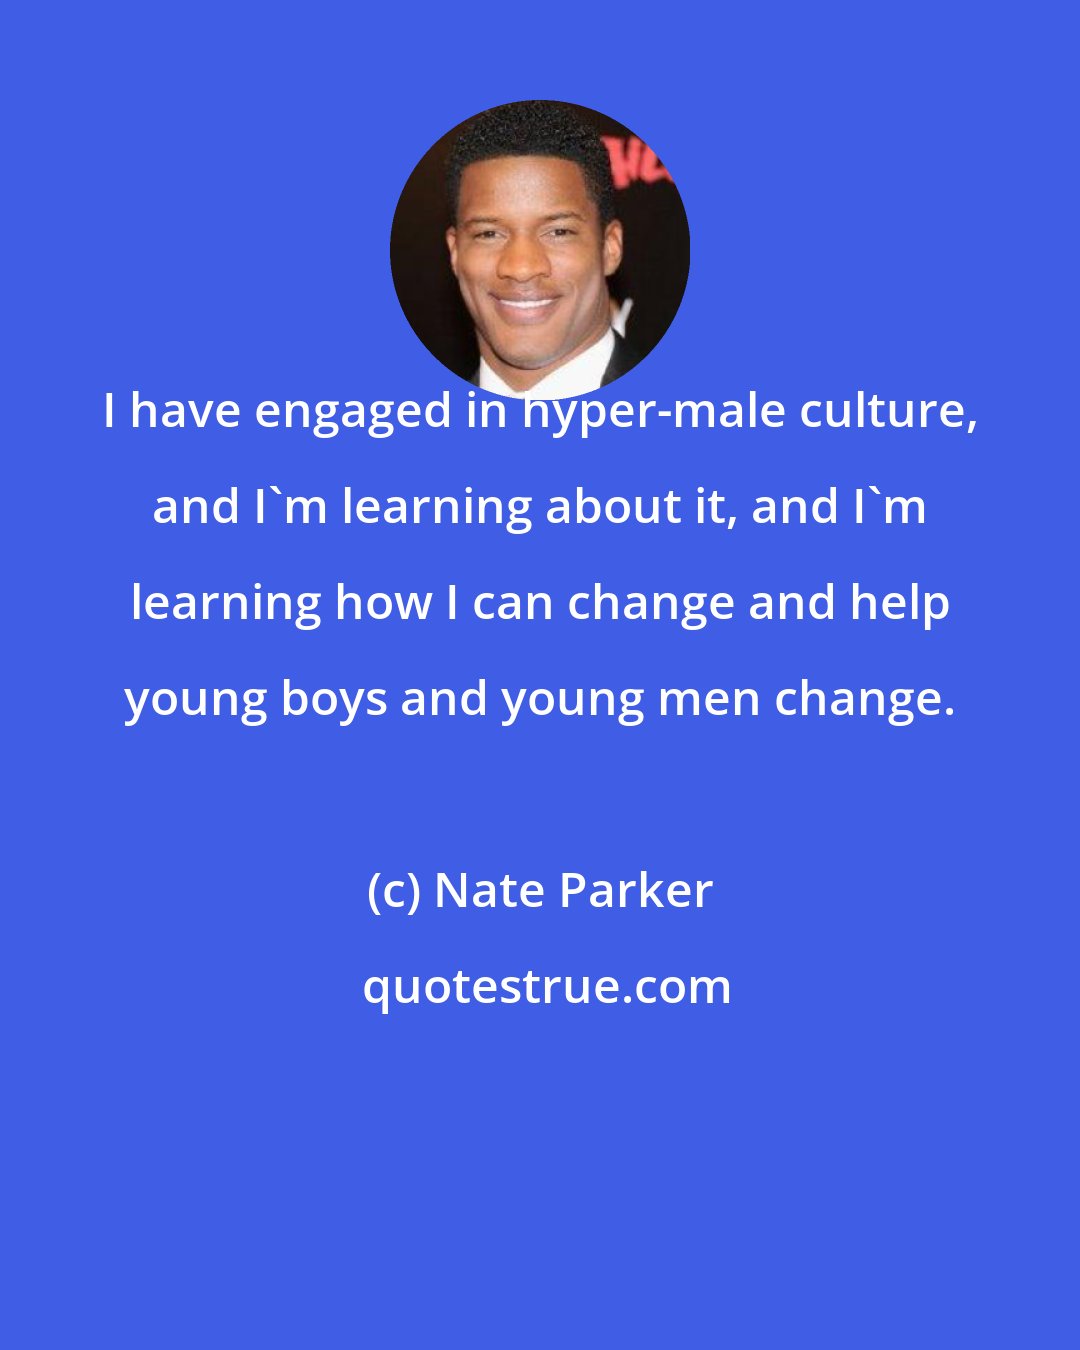 Nate Parker: I have engaged in hyper-male culture, and I'm learning about it, and I'm learning how I can change and help young boys and young men change.